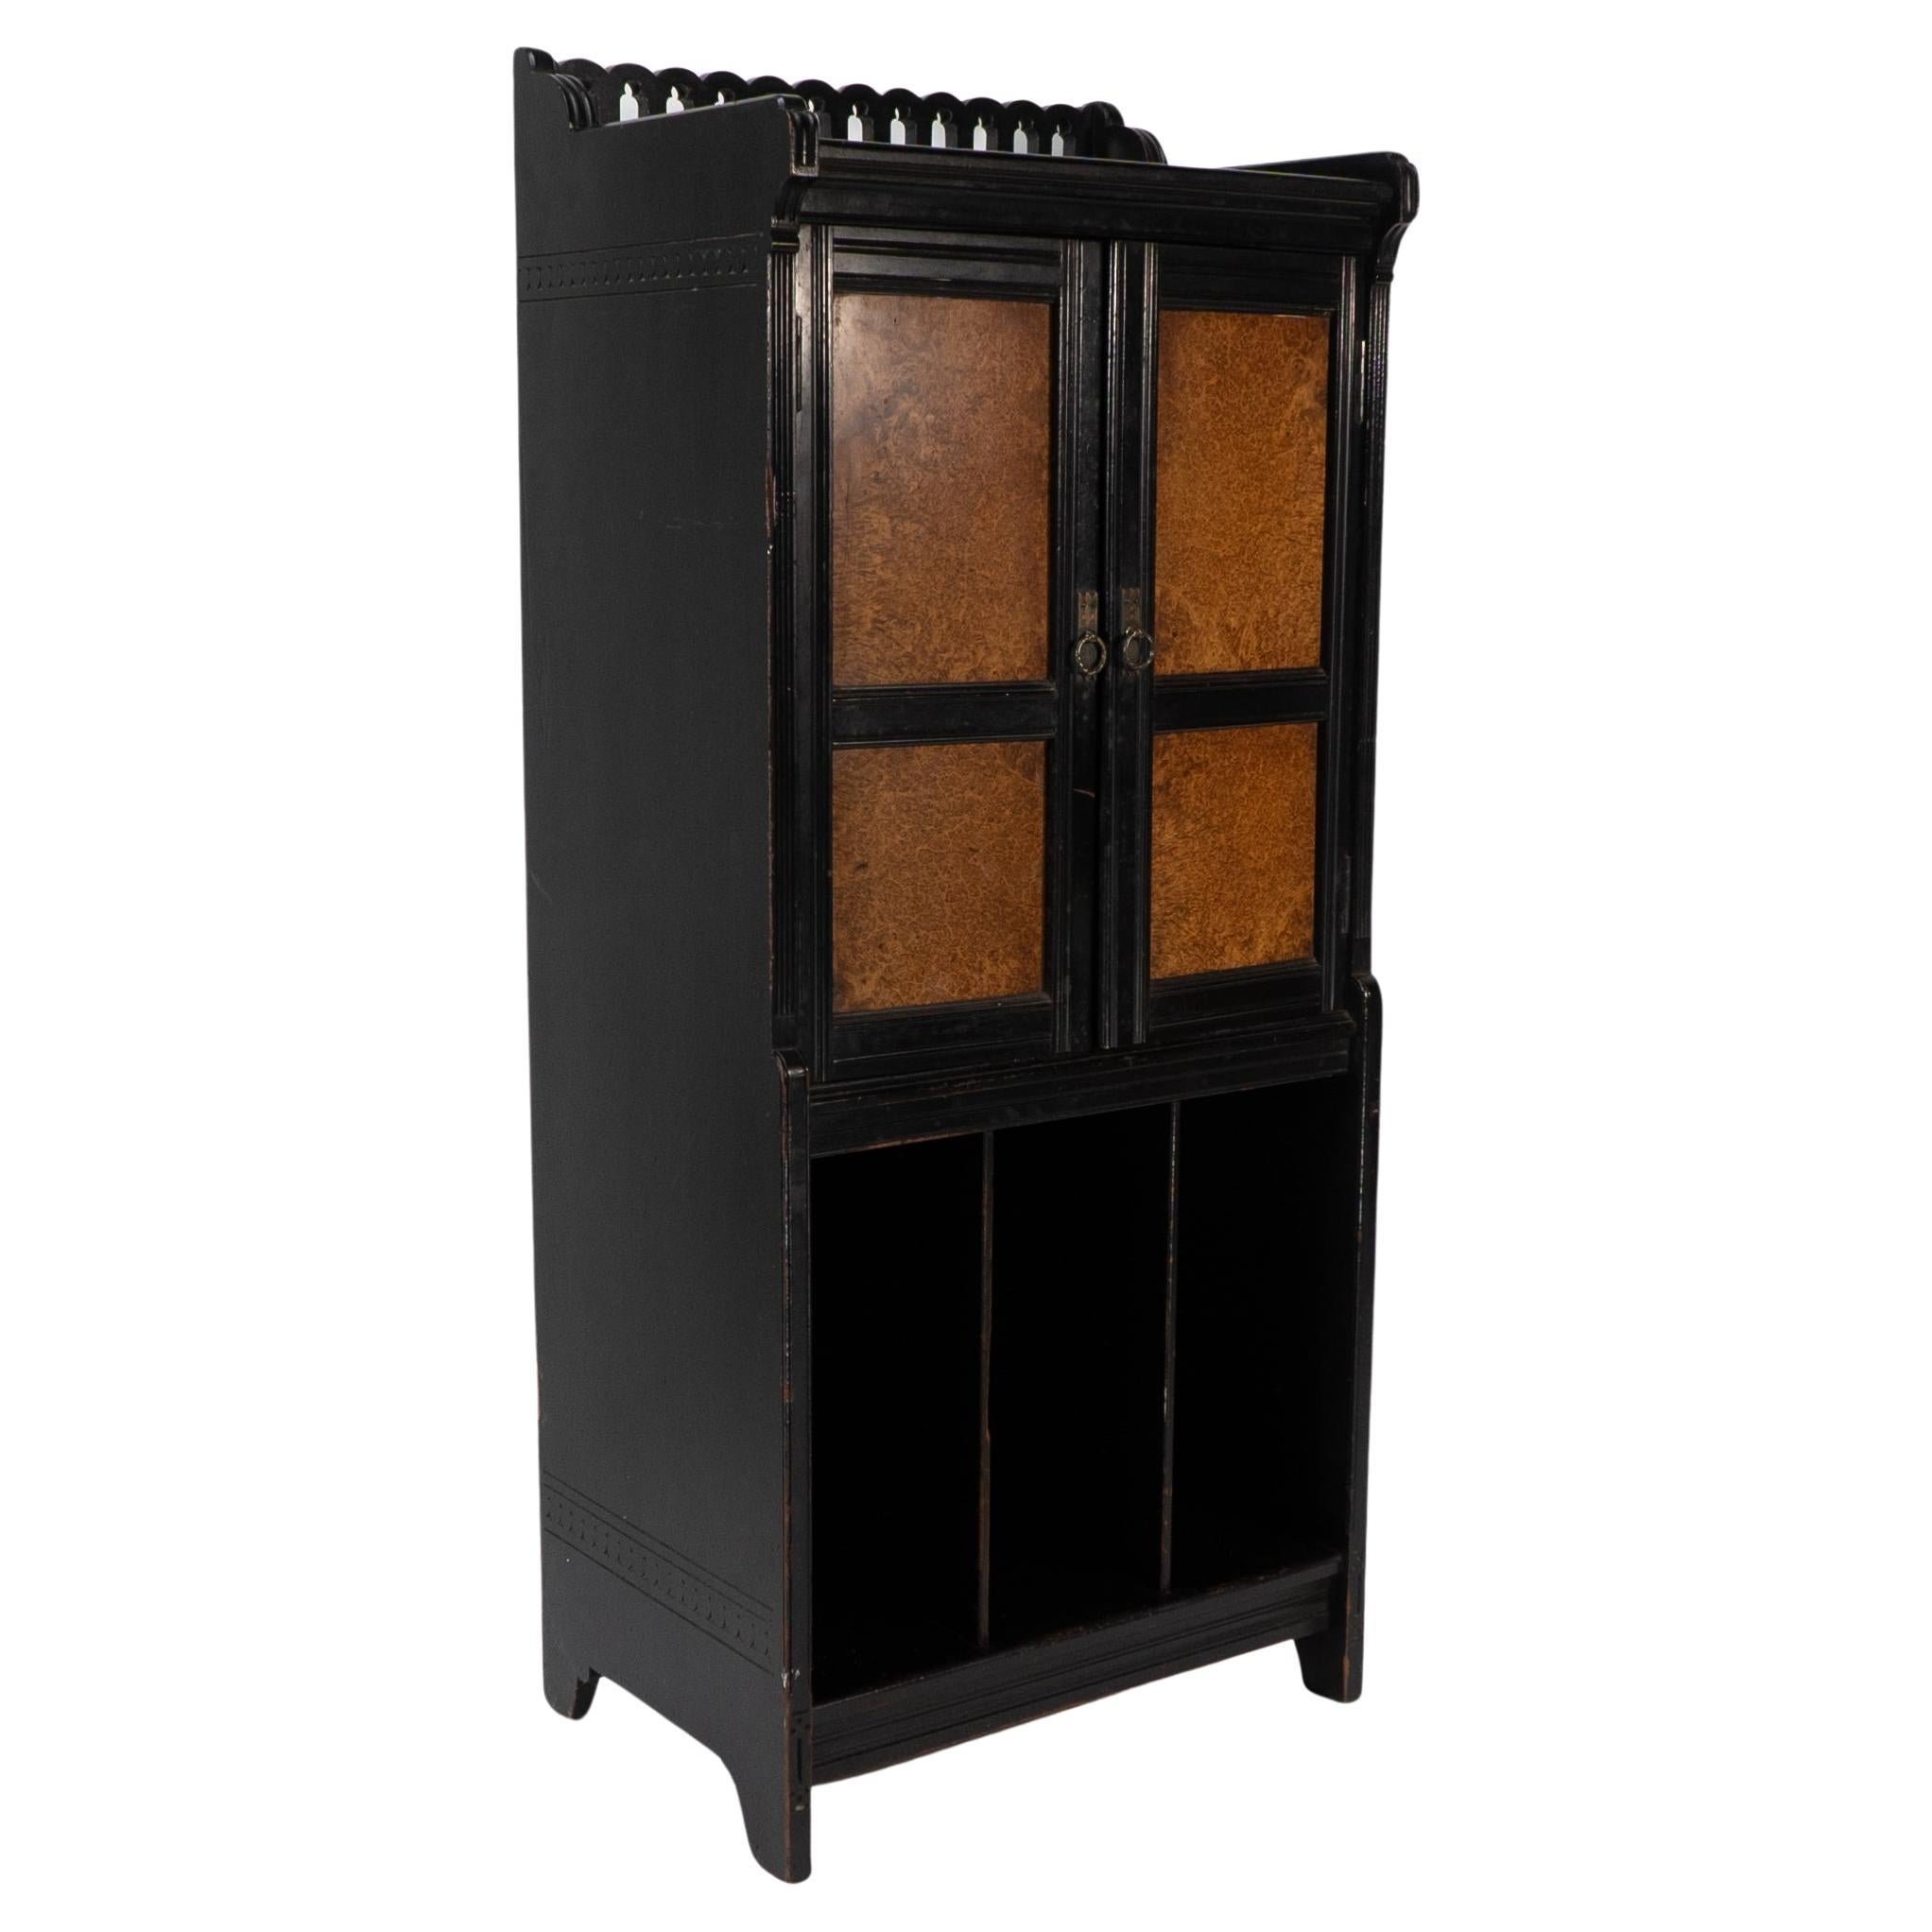 Fine and Rare English Aesthetic Movement Cabinet For Sale at 1stdibs